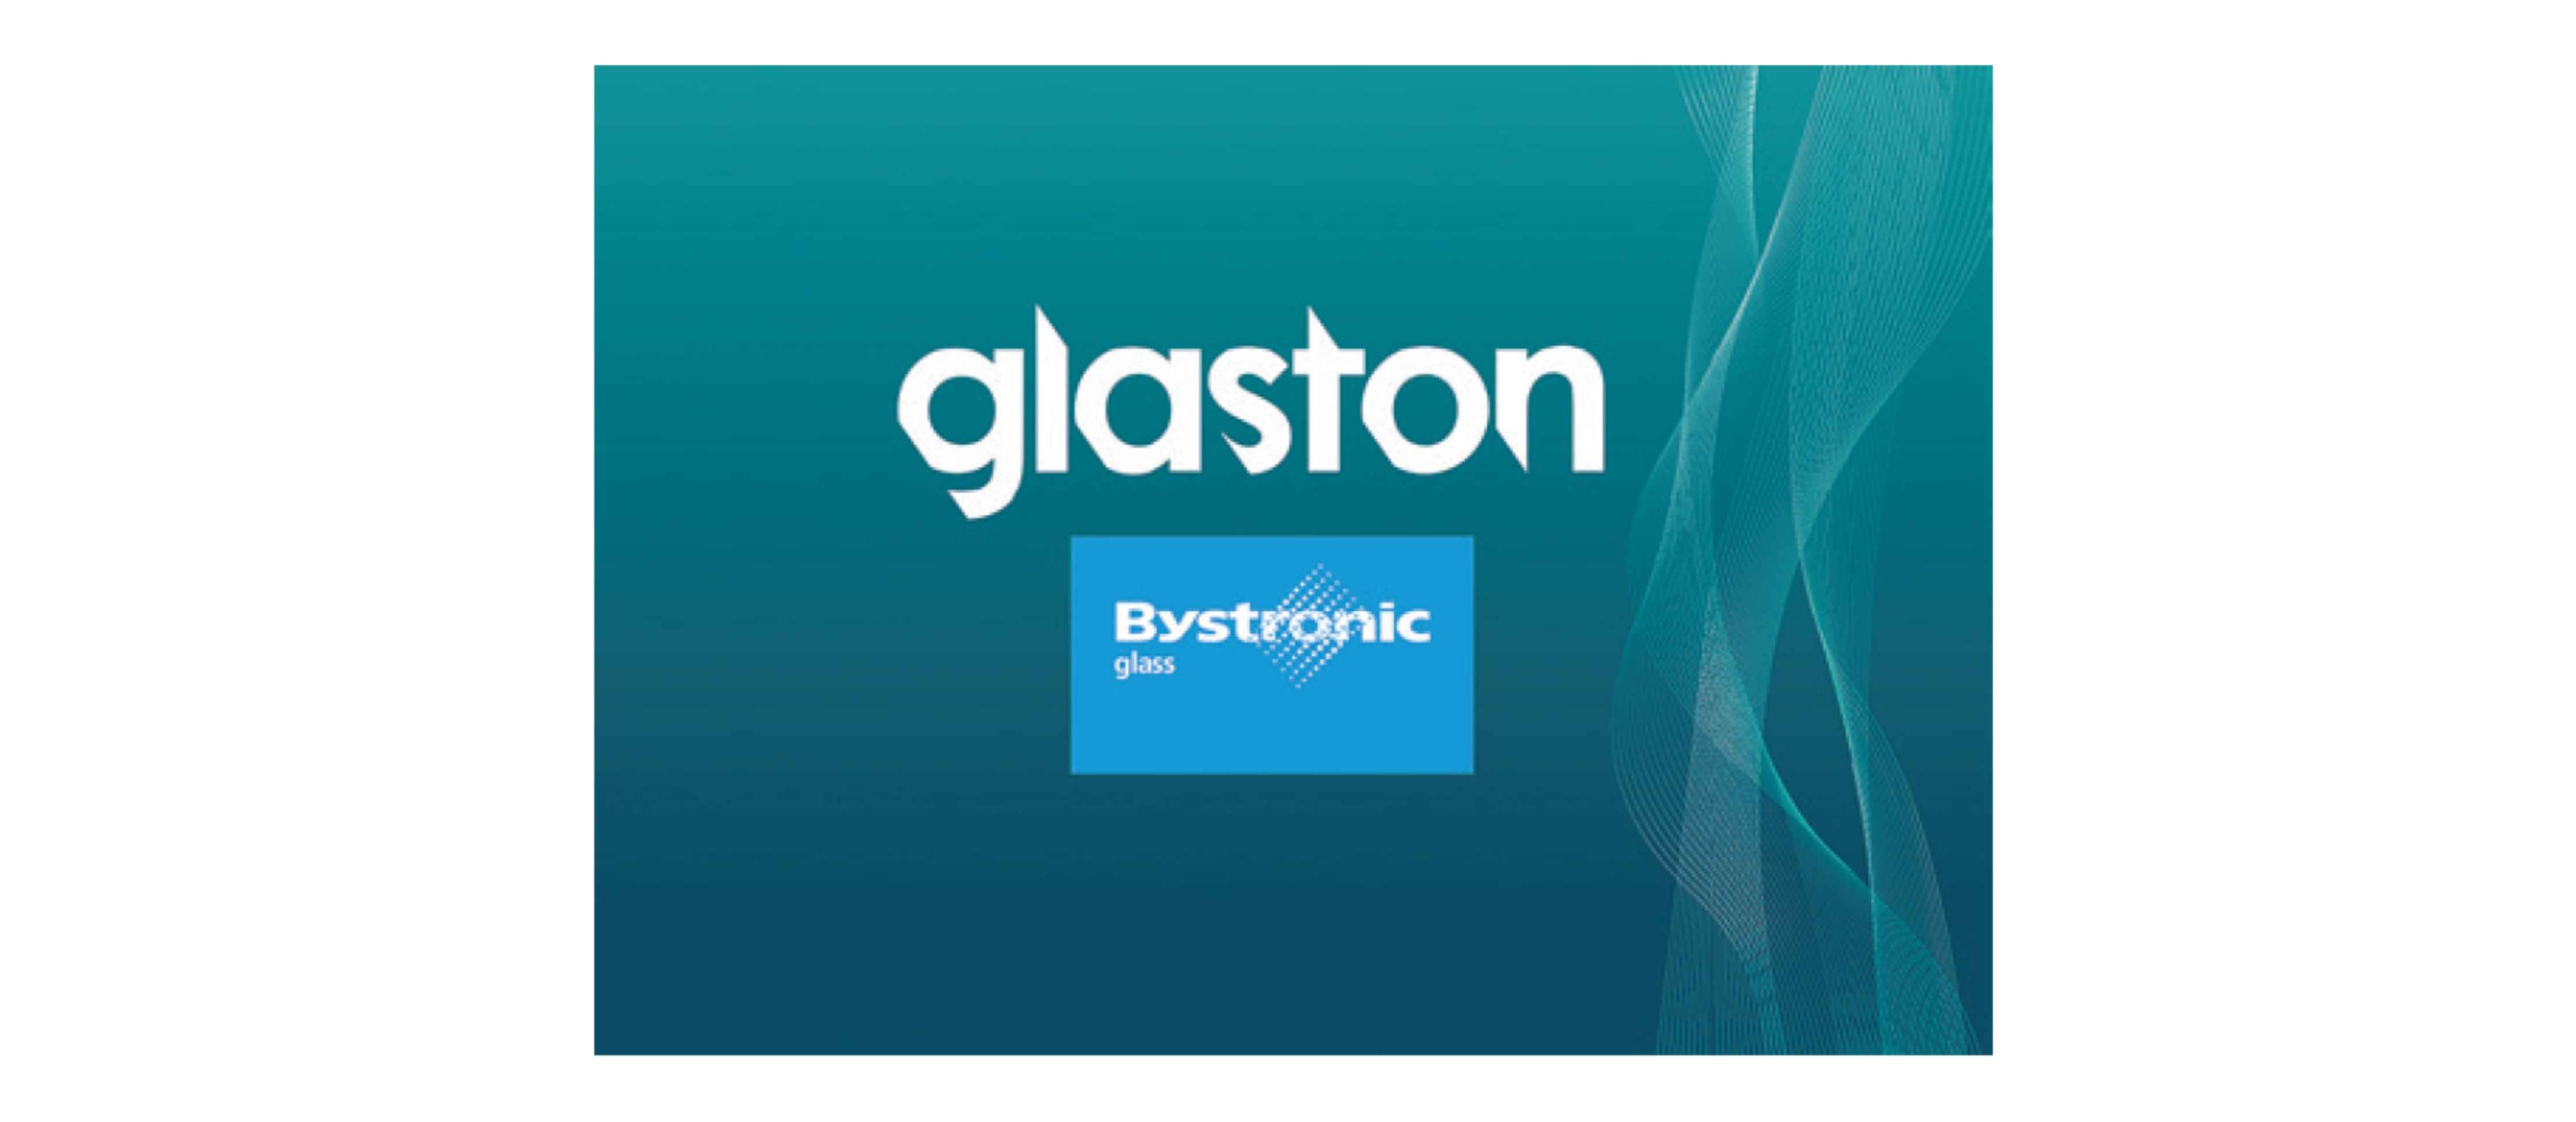 Glaston Corporation acquires Bystronic glass